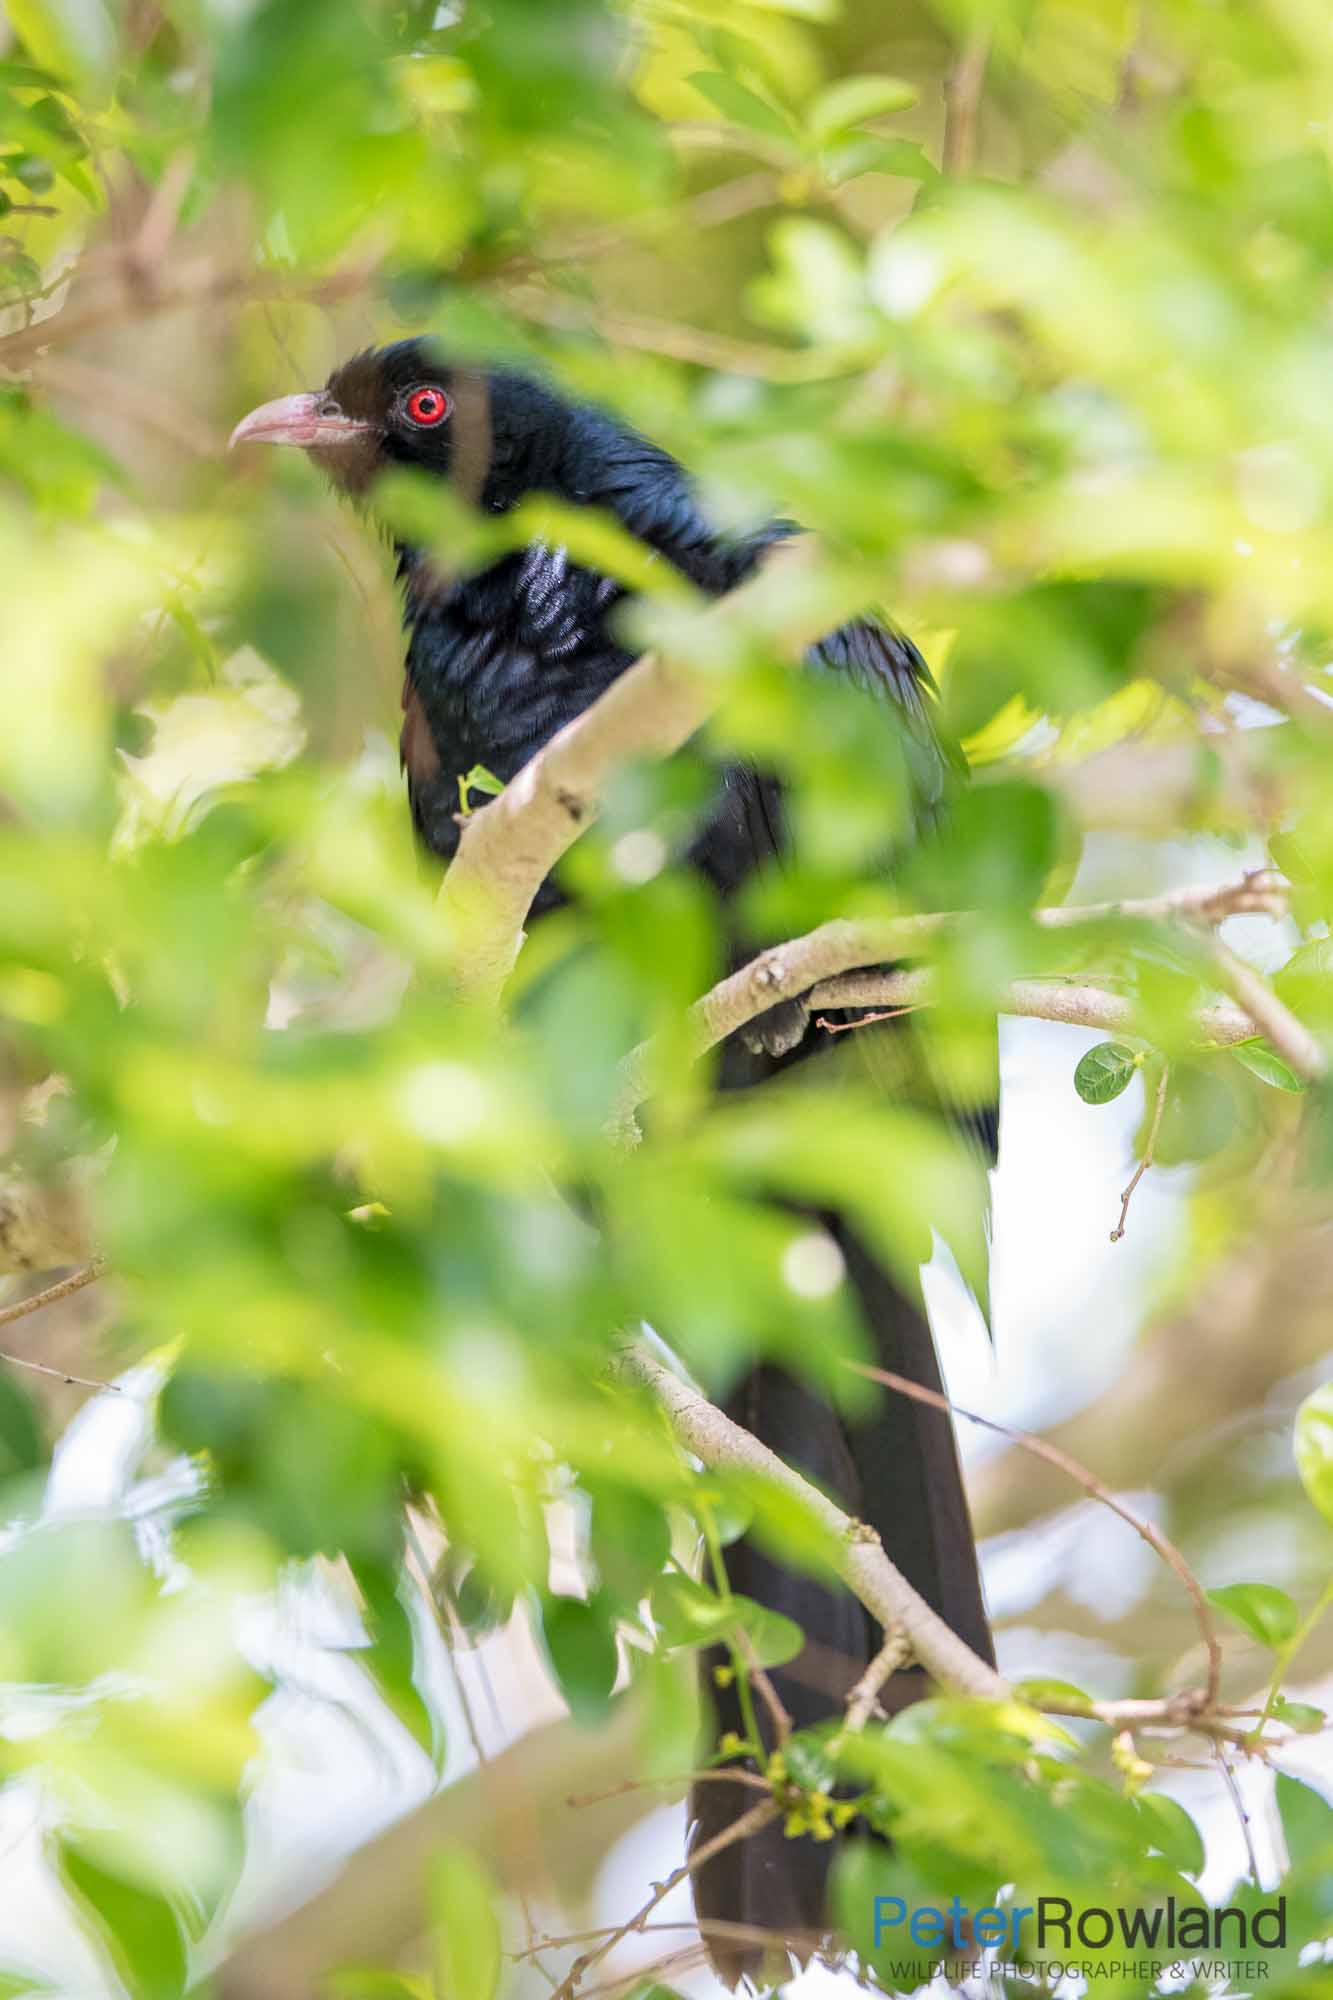 A male Common Koel concealed within foliage of a tree. [Photographed by Peter Rowland]